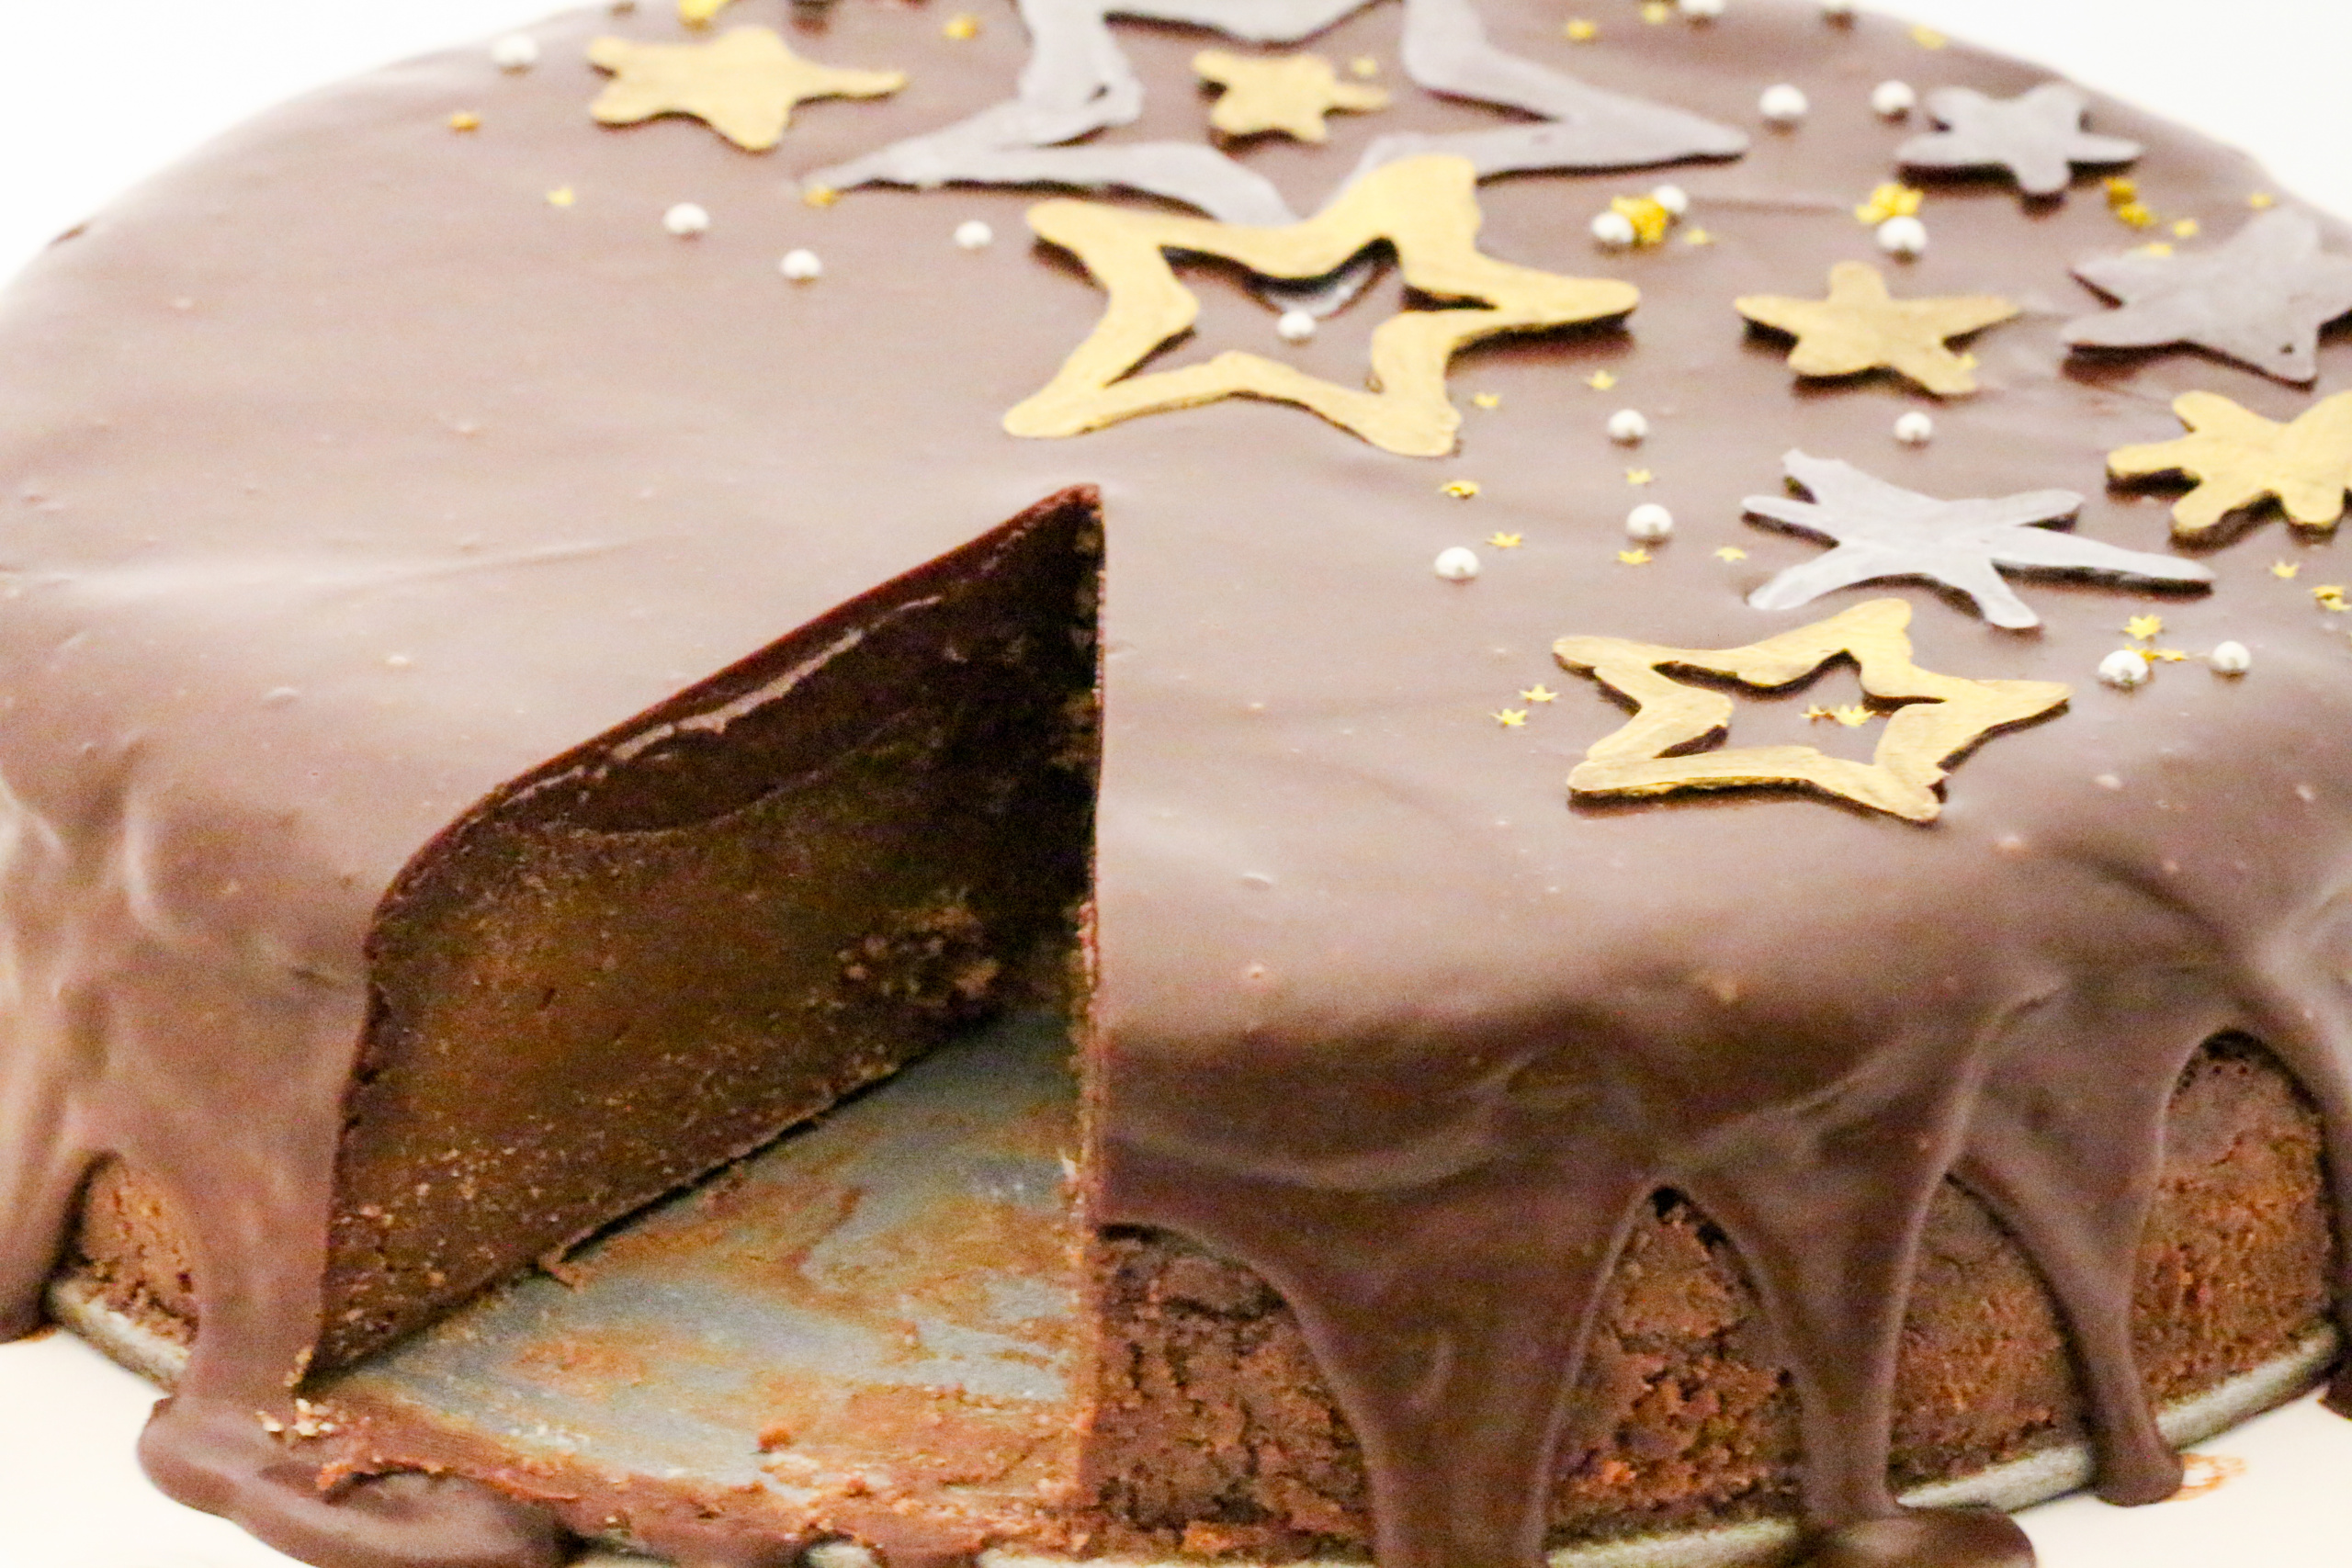 With a fairly short ingredient list and easy instructions, DOUBLE CHOCOLATE MOUSSE CAKE is a mouthwateringly decadent dessert. It's simple enough for casual gatherings and elegant enough for guests. Recipe shared with permission granted by Cindy Sample, author of DYING FOR A DOUBLE.